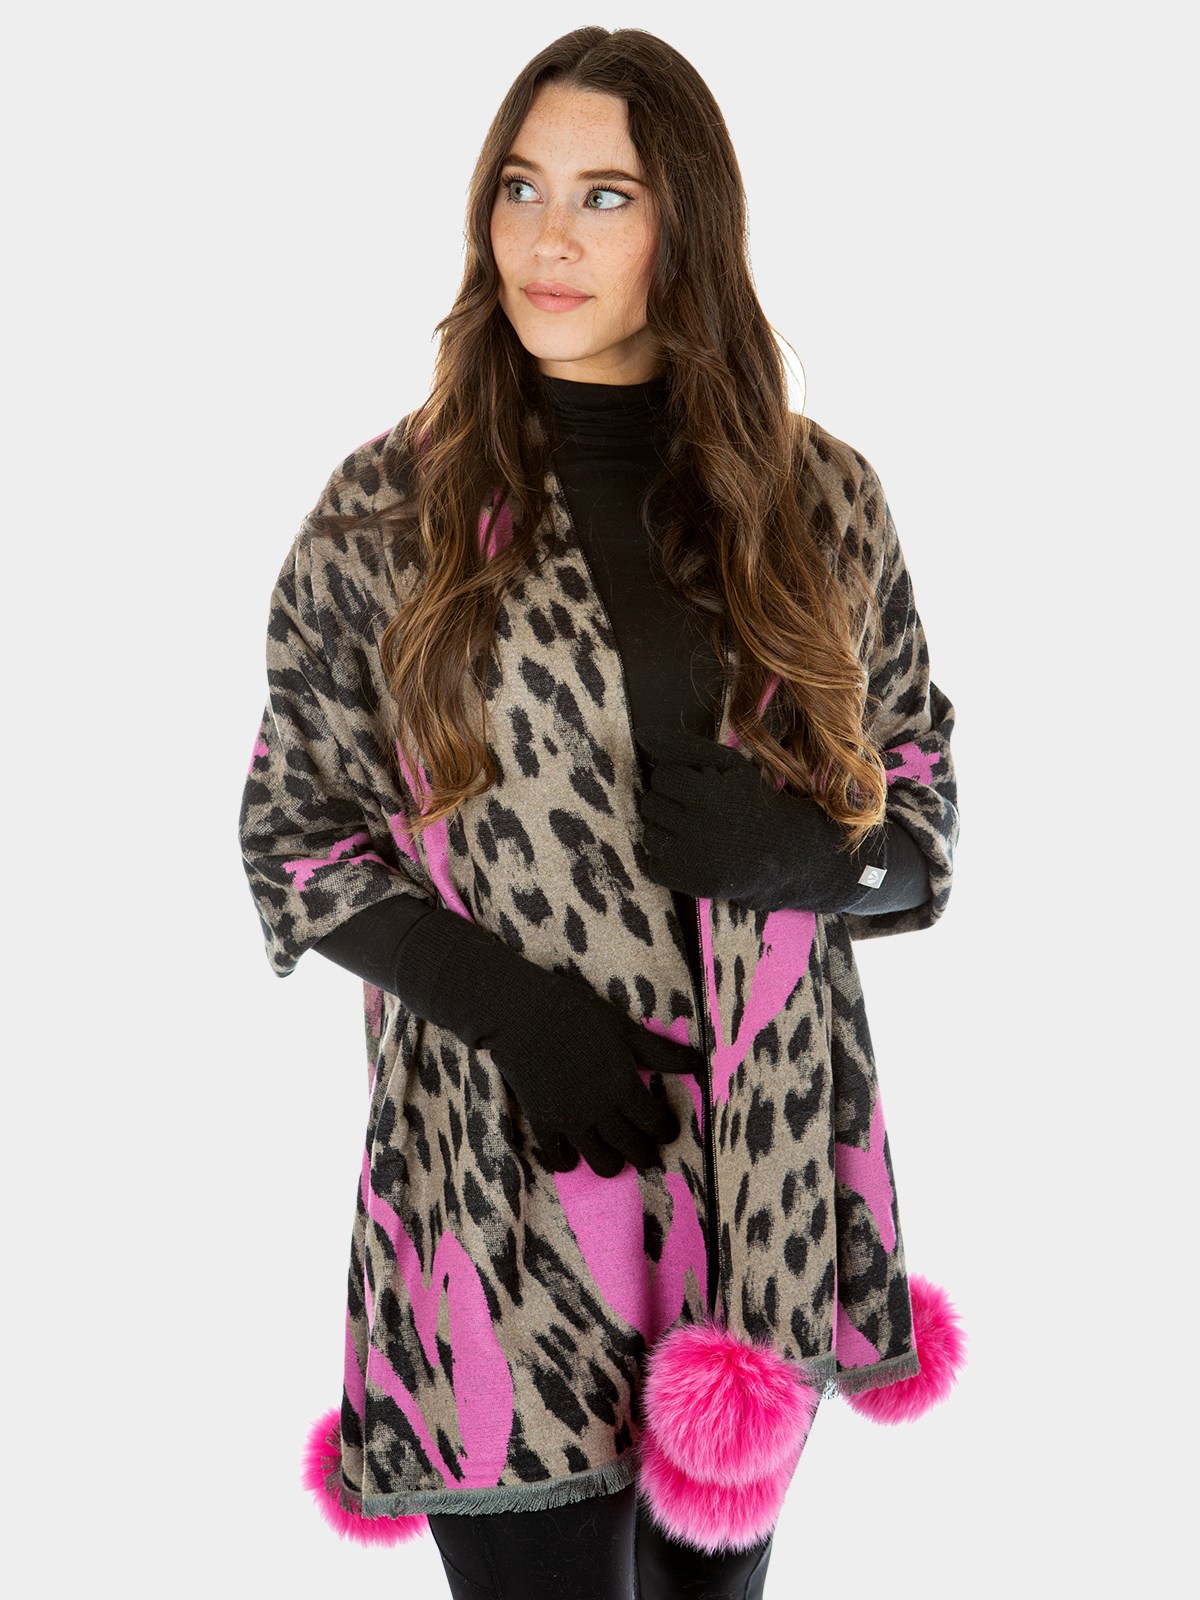 Woman's Pink Woven Fabric Scarf with Animal Heart Print and Fox Fur Pom-Poms